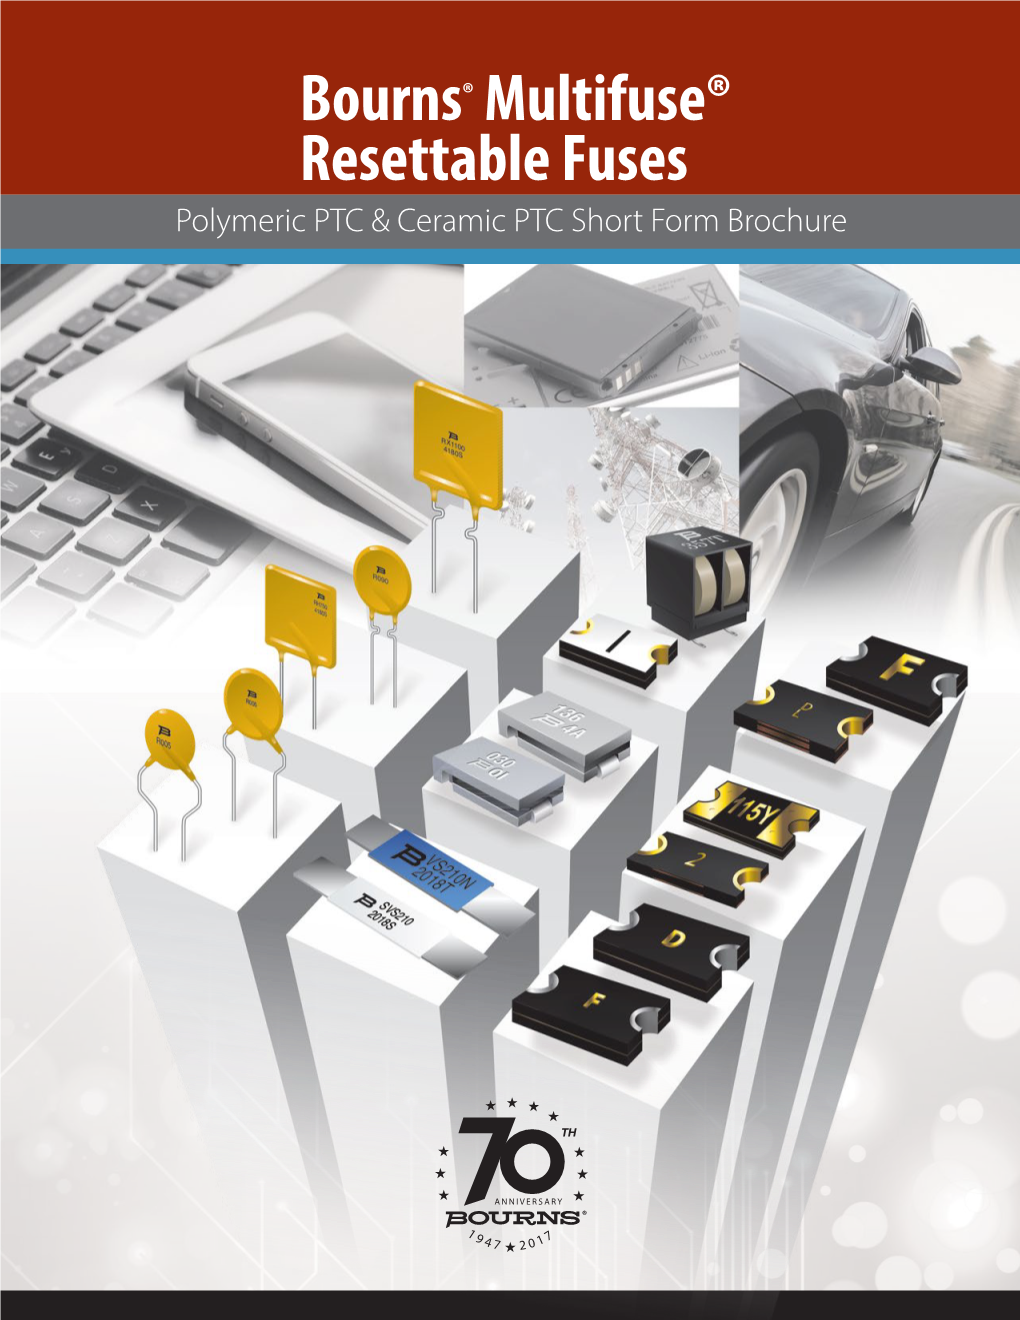 Bourns® Multifuse® Resettable Fuses Polymeric PTC & Ceramic PTC Short Form Brochure Bourns® Multifuse® Products